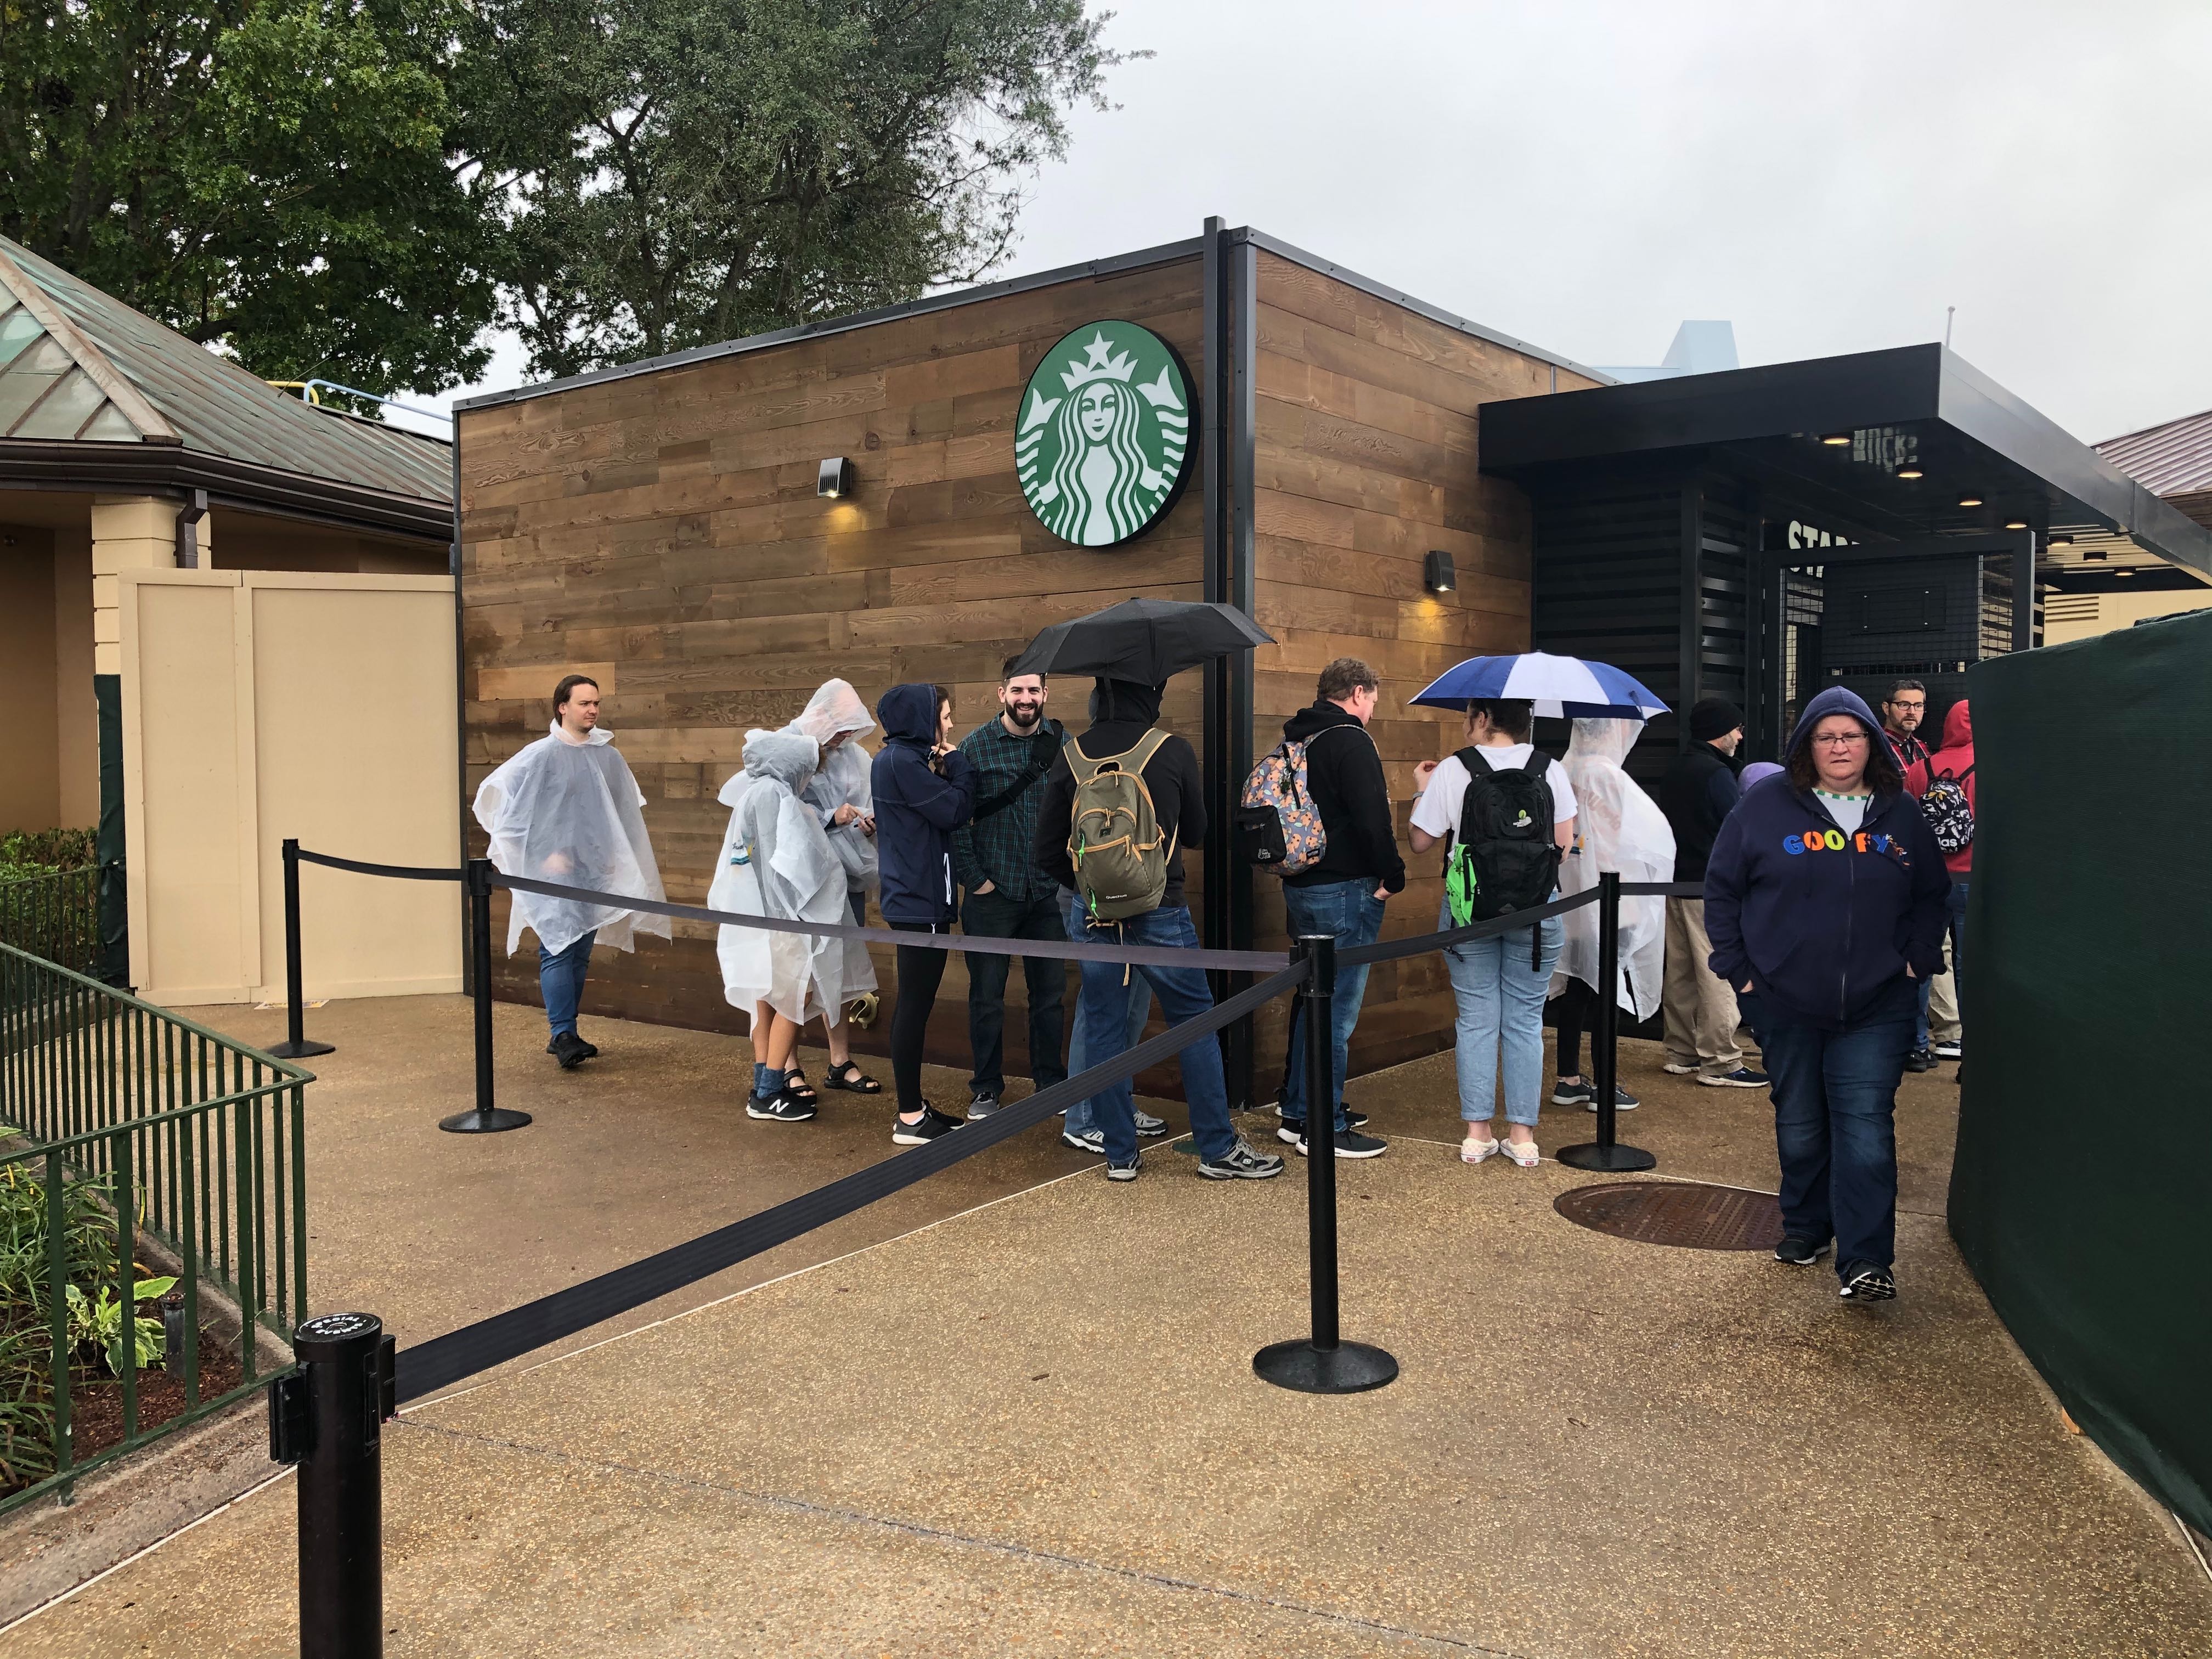 PHOTOS, VIDEO New Starbucks "Traveler's Cafe" Now Officially Open at